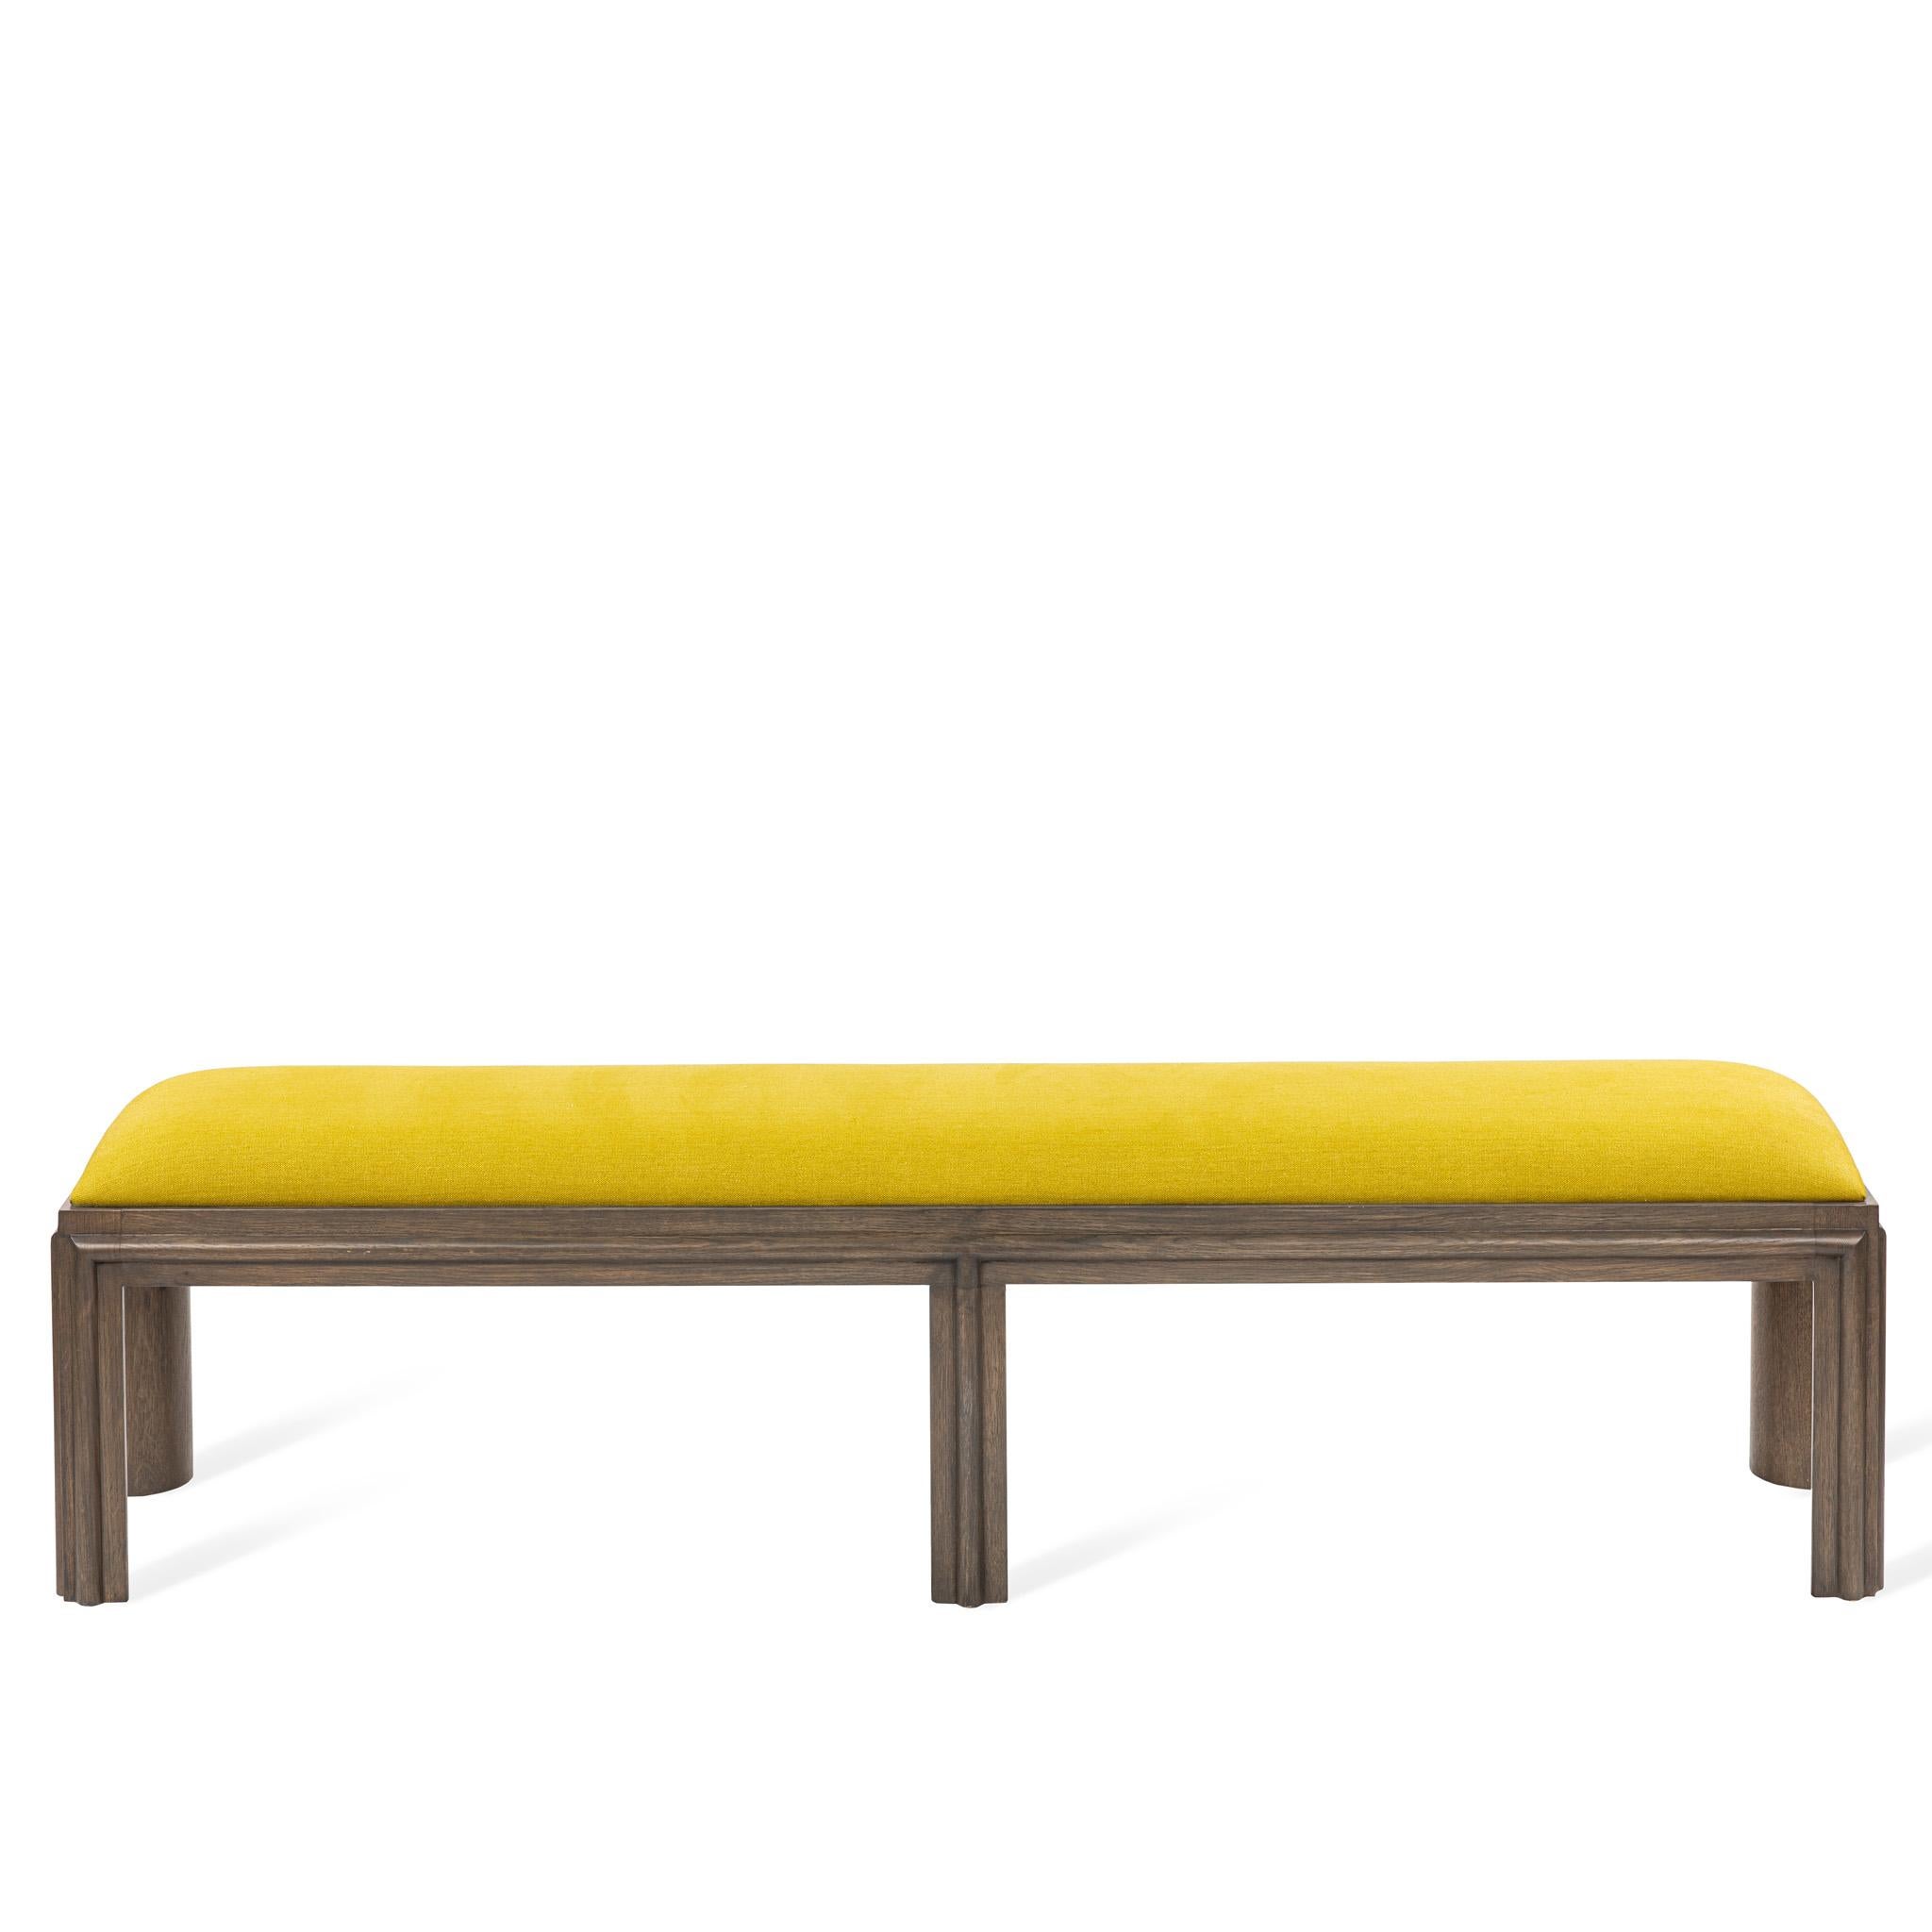 Designed by Josh Greene.
Bench designed to fit at the end of the bed. Also available in 72L.